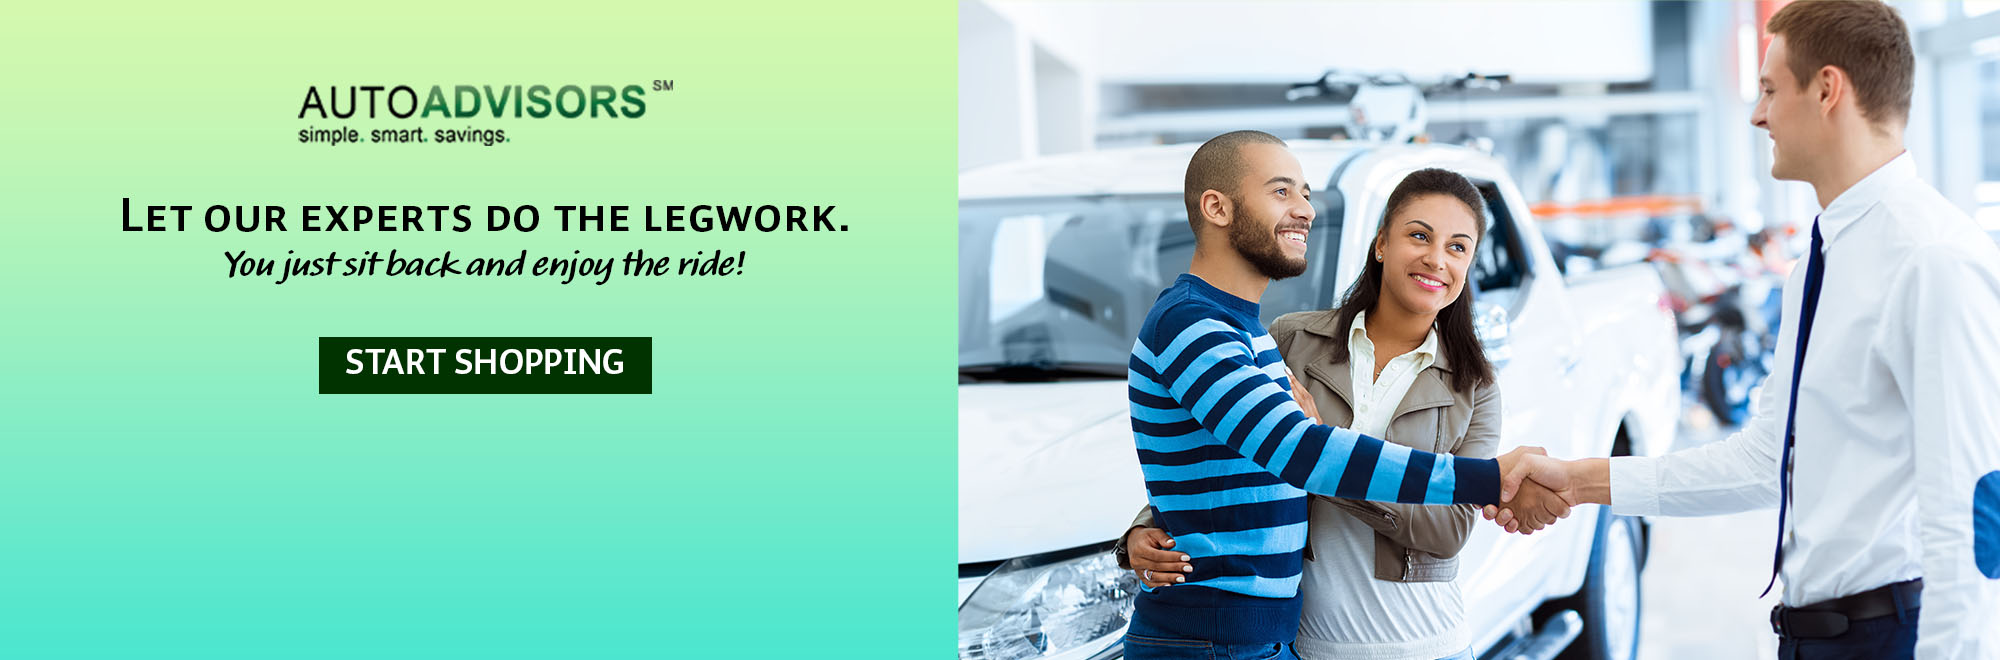 Let our experts do the legwork. You just sit back and enjoy the ride with AutoAdvisors. Start shopping.